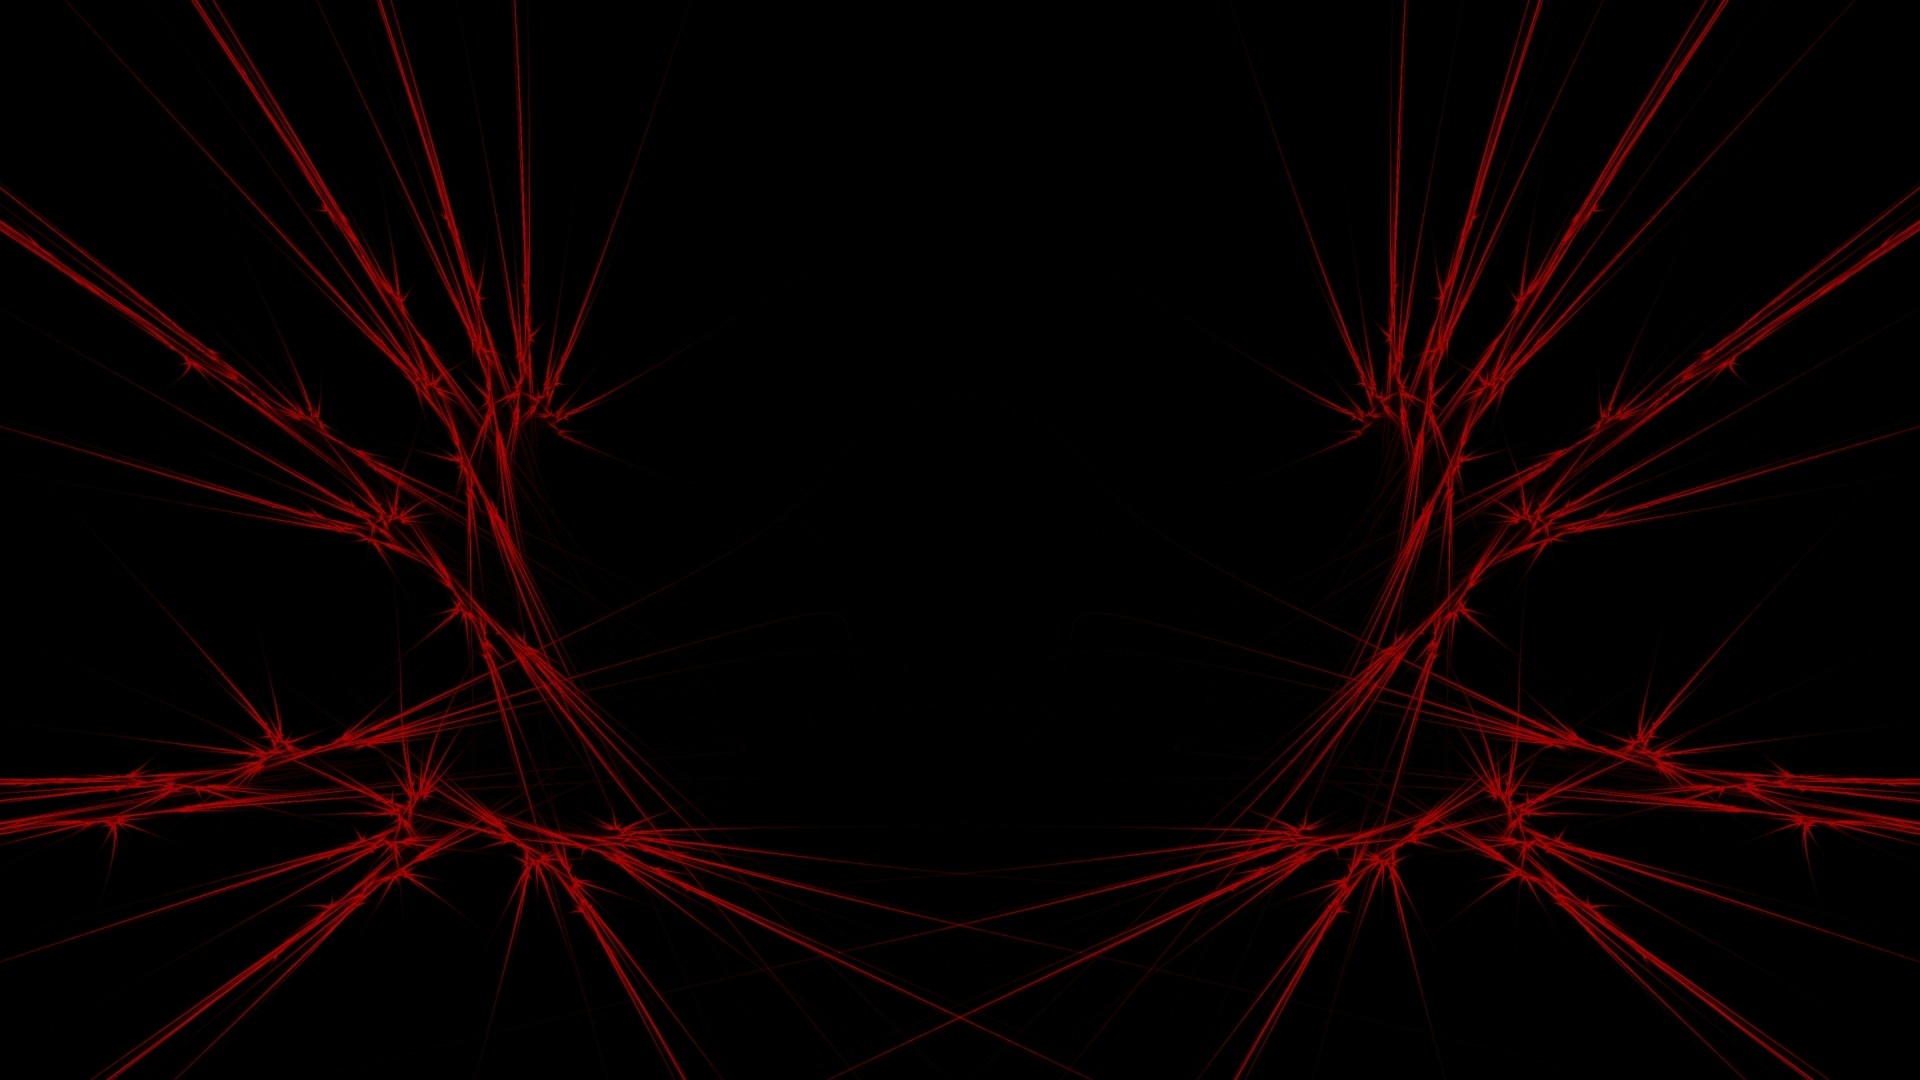 1920x1080 Cool Black And Red Wallpapers Wallpaper 1920Ã1080 Black And Red Abstract  Wallpapers (73